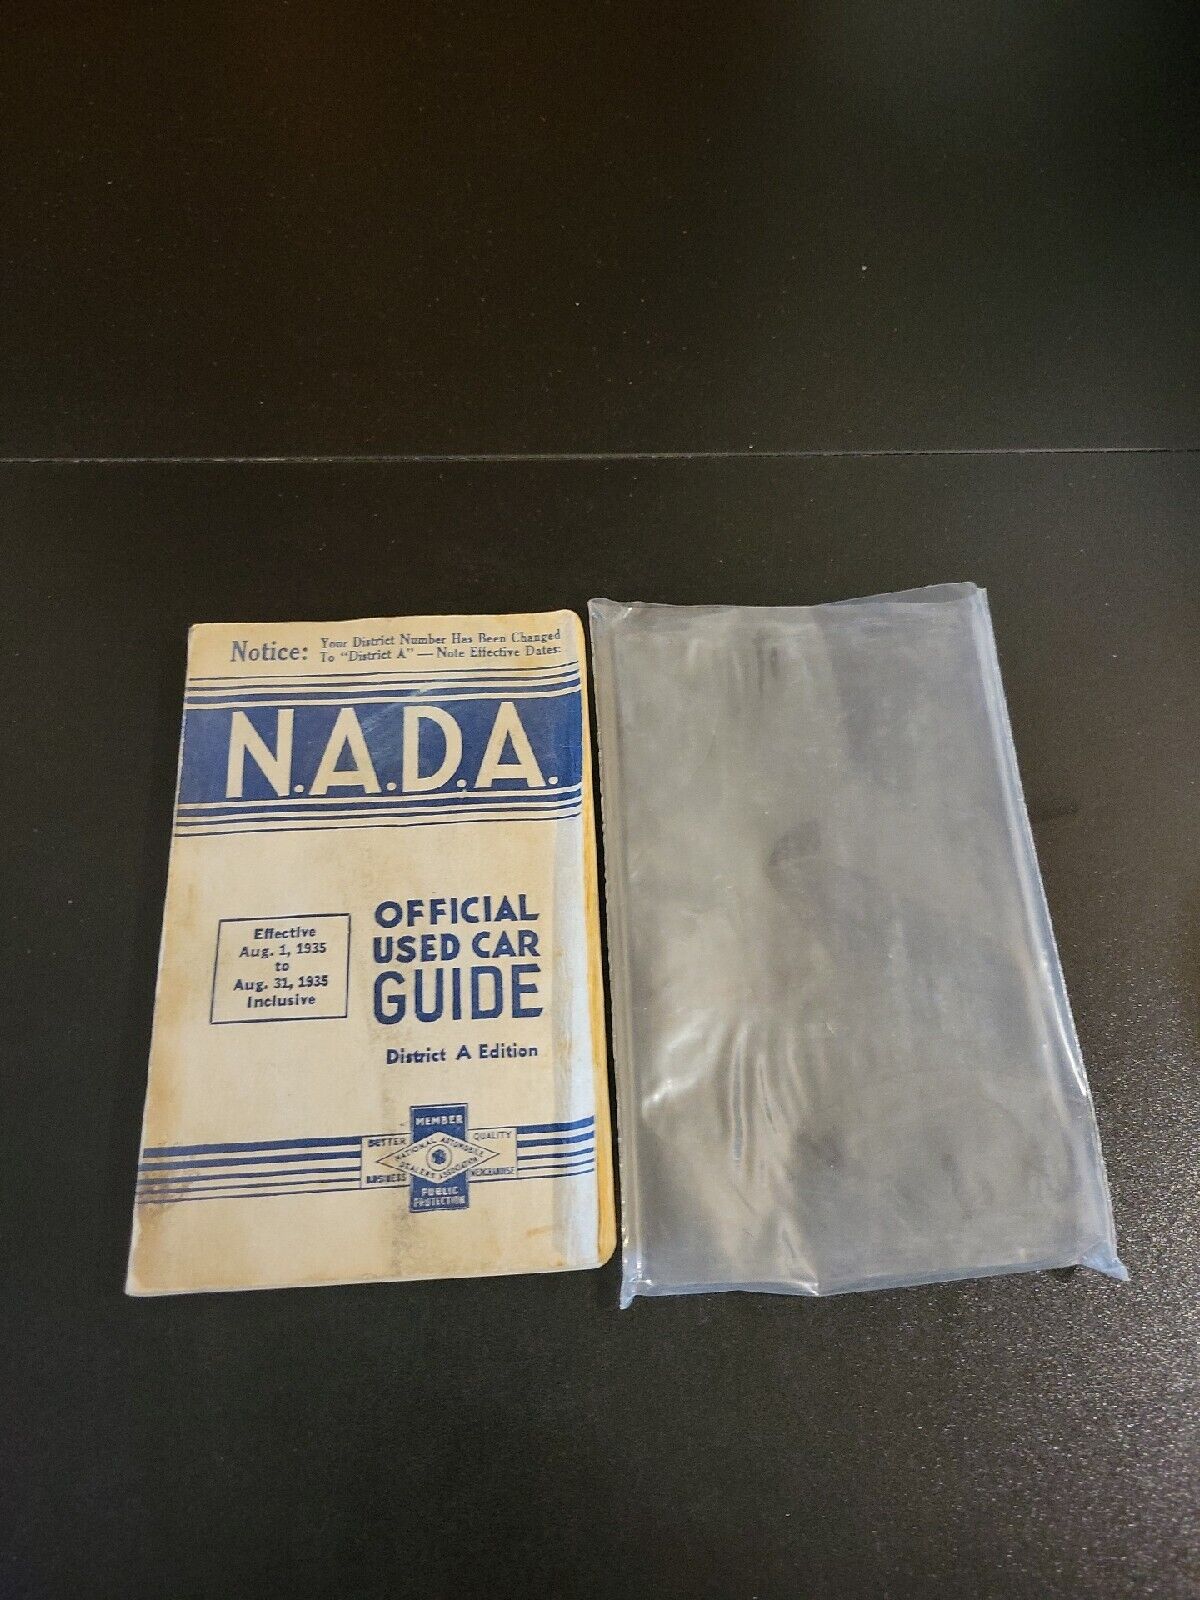 1935 N.A.D.A OFFICIAL USED CAR GUIDE MANUAL BOOKLET DISTRICT A EDITION 